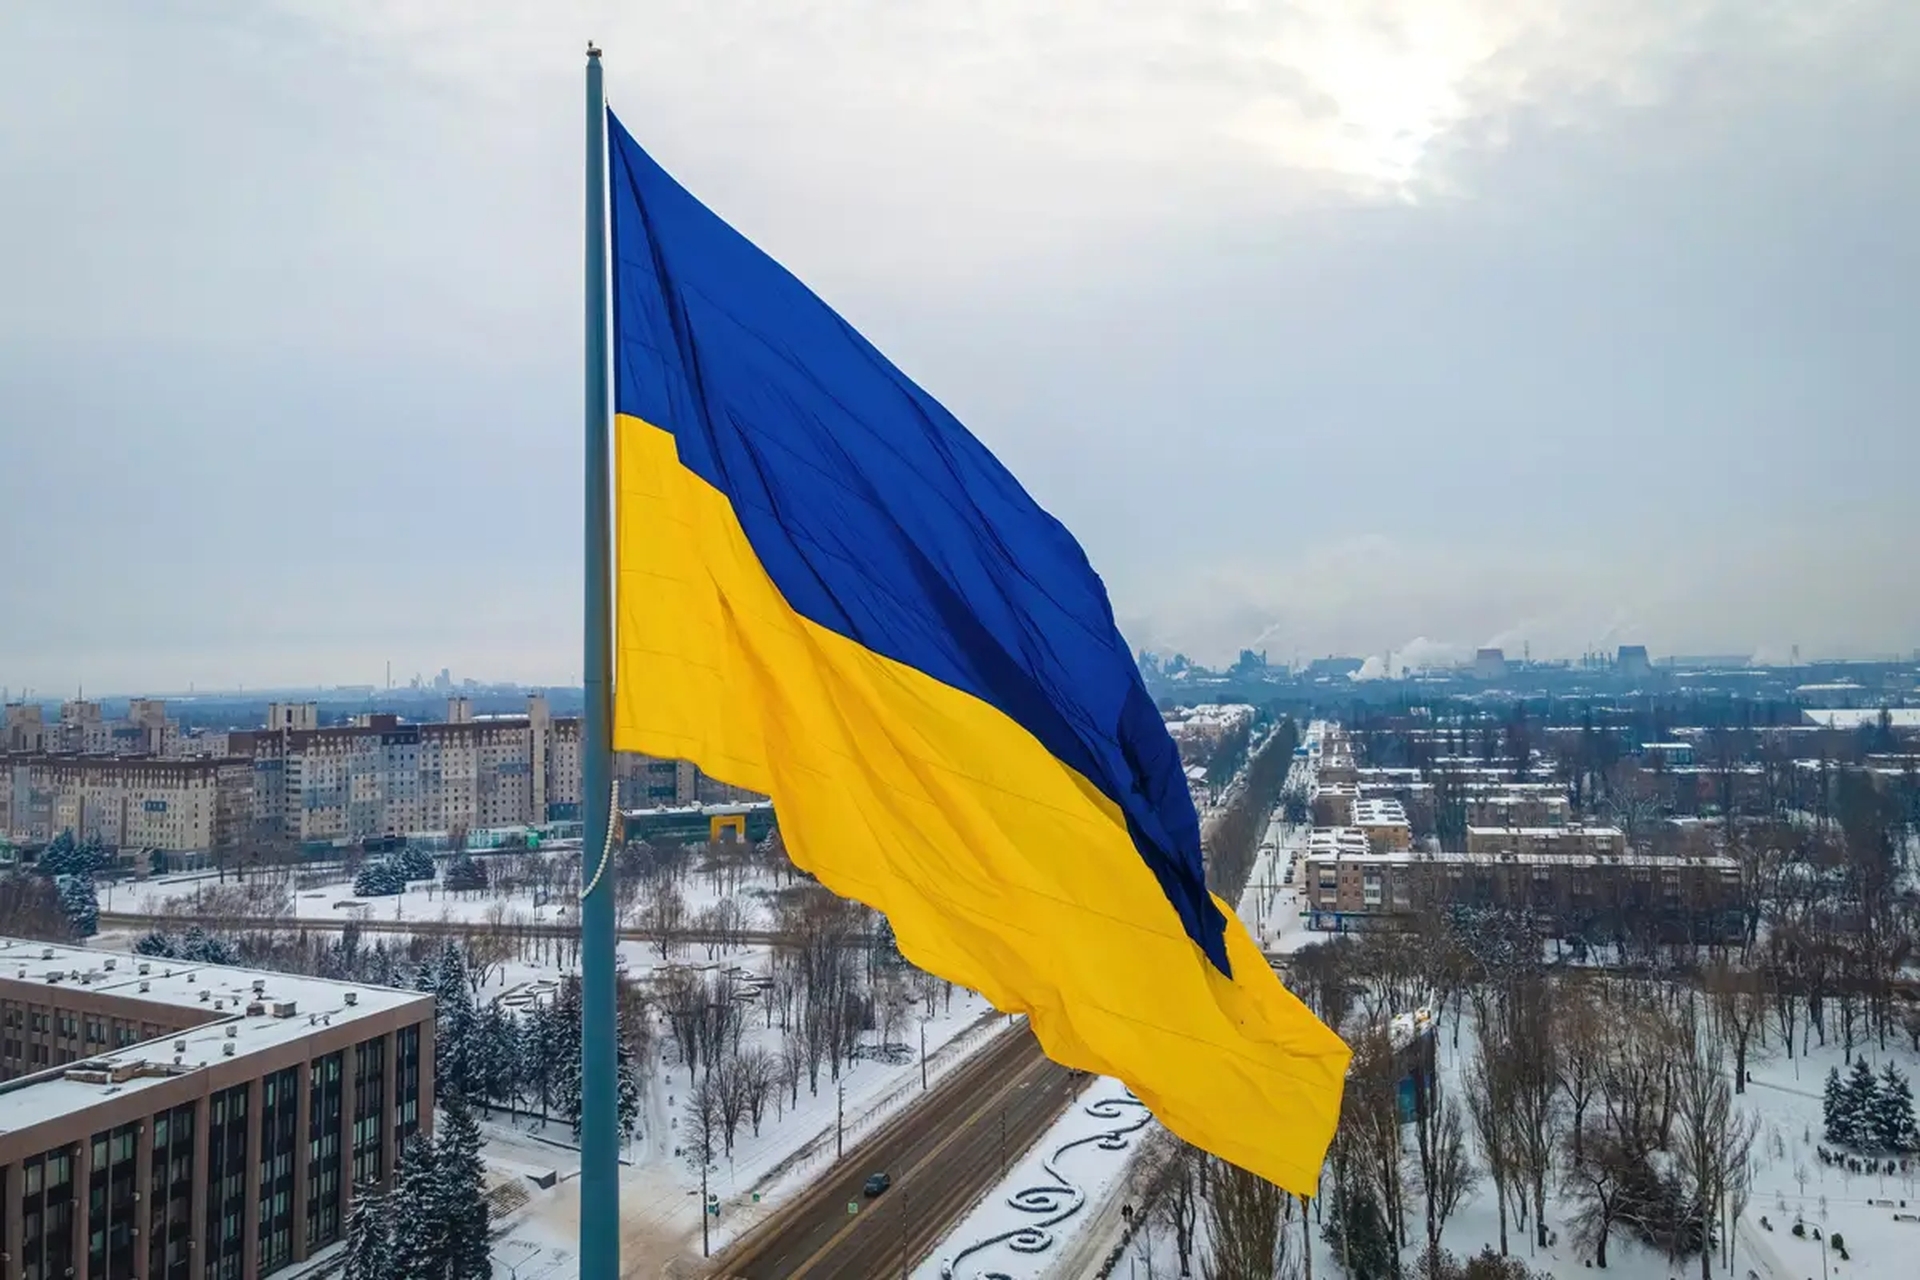 Even though the war between Ukraine and Russia has been going on for months, the Ukraine fintech industry keeps growing, and here is why.